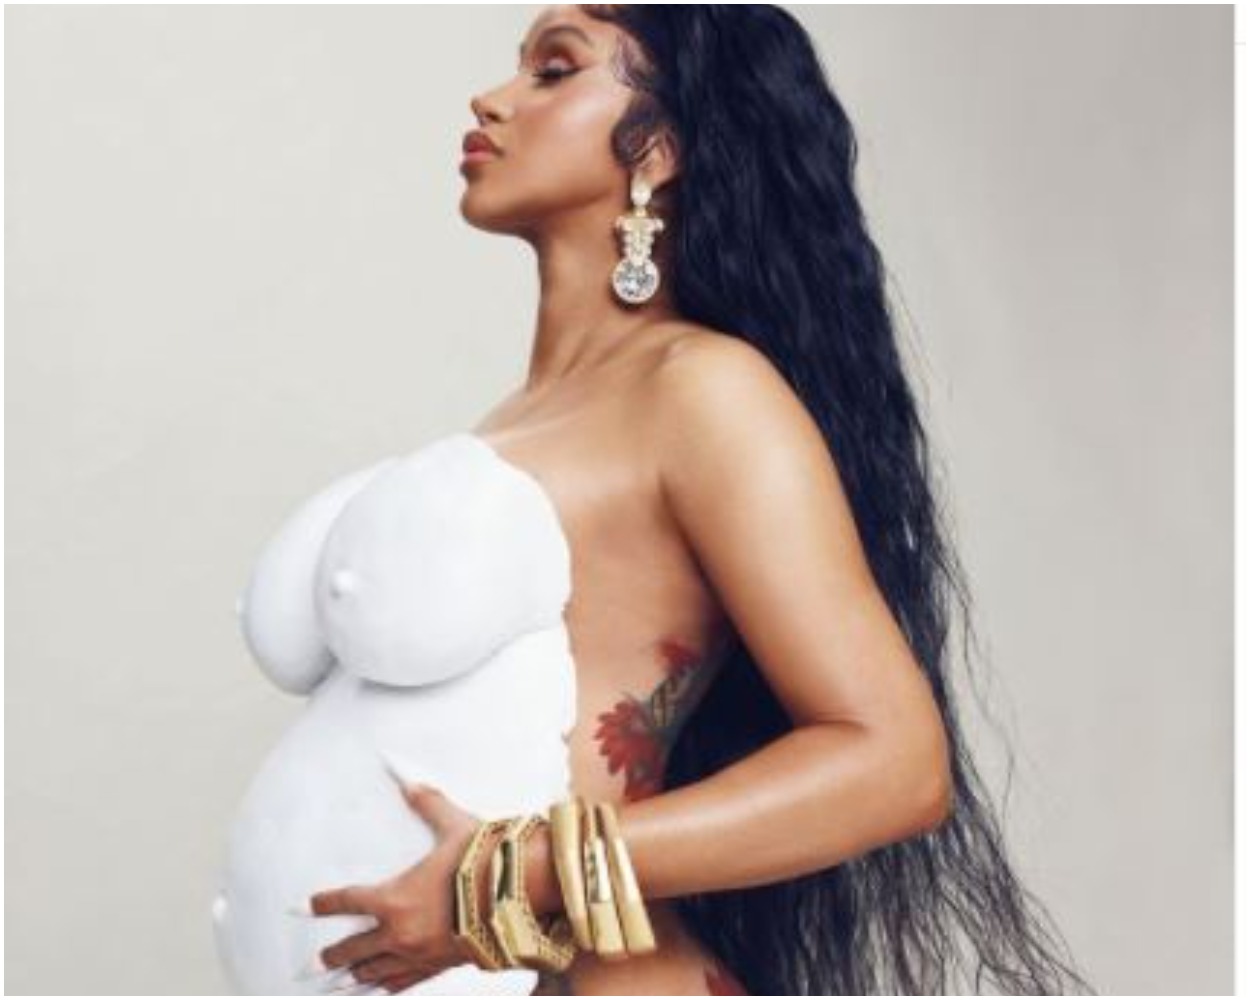 Cardi B Expecting Baby Number 2, With Hubby, Offset